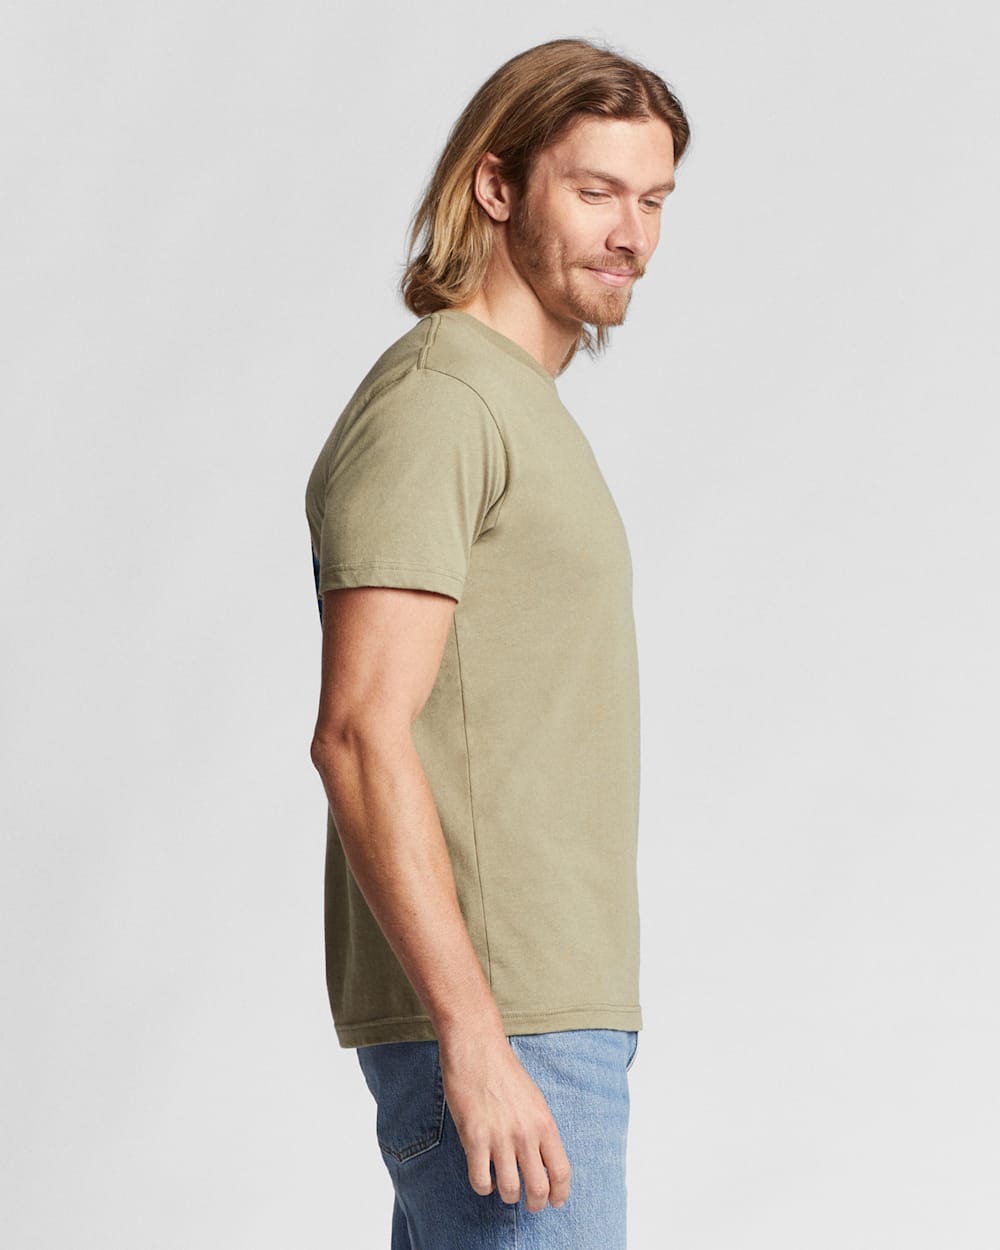 ALTERNATE VIEW OF MEN'S BISON HEAD GRAPHIC TEE IN LIGHT OLIVE/MULTI image number 3